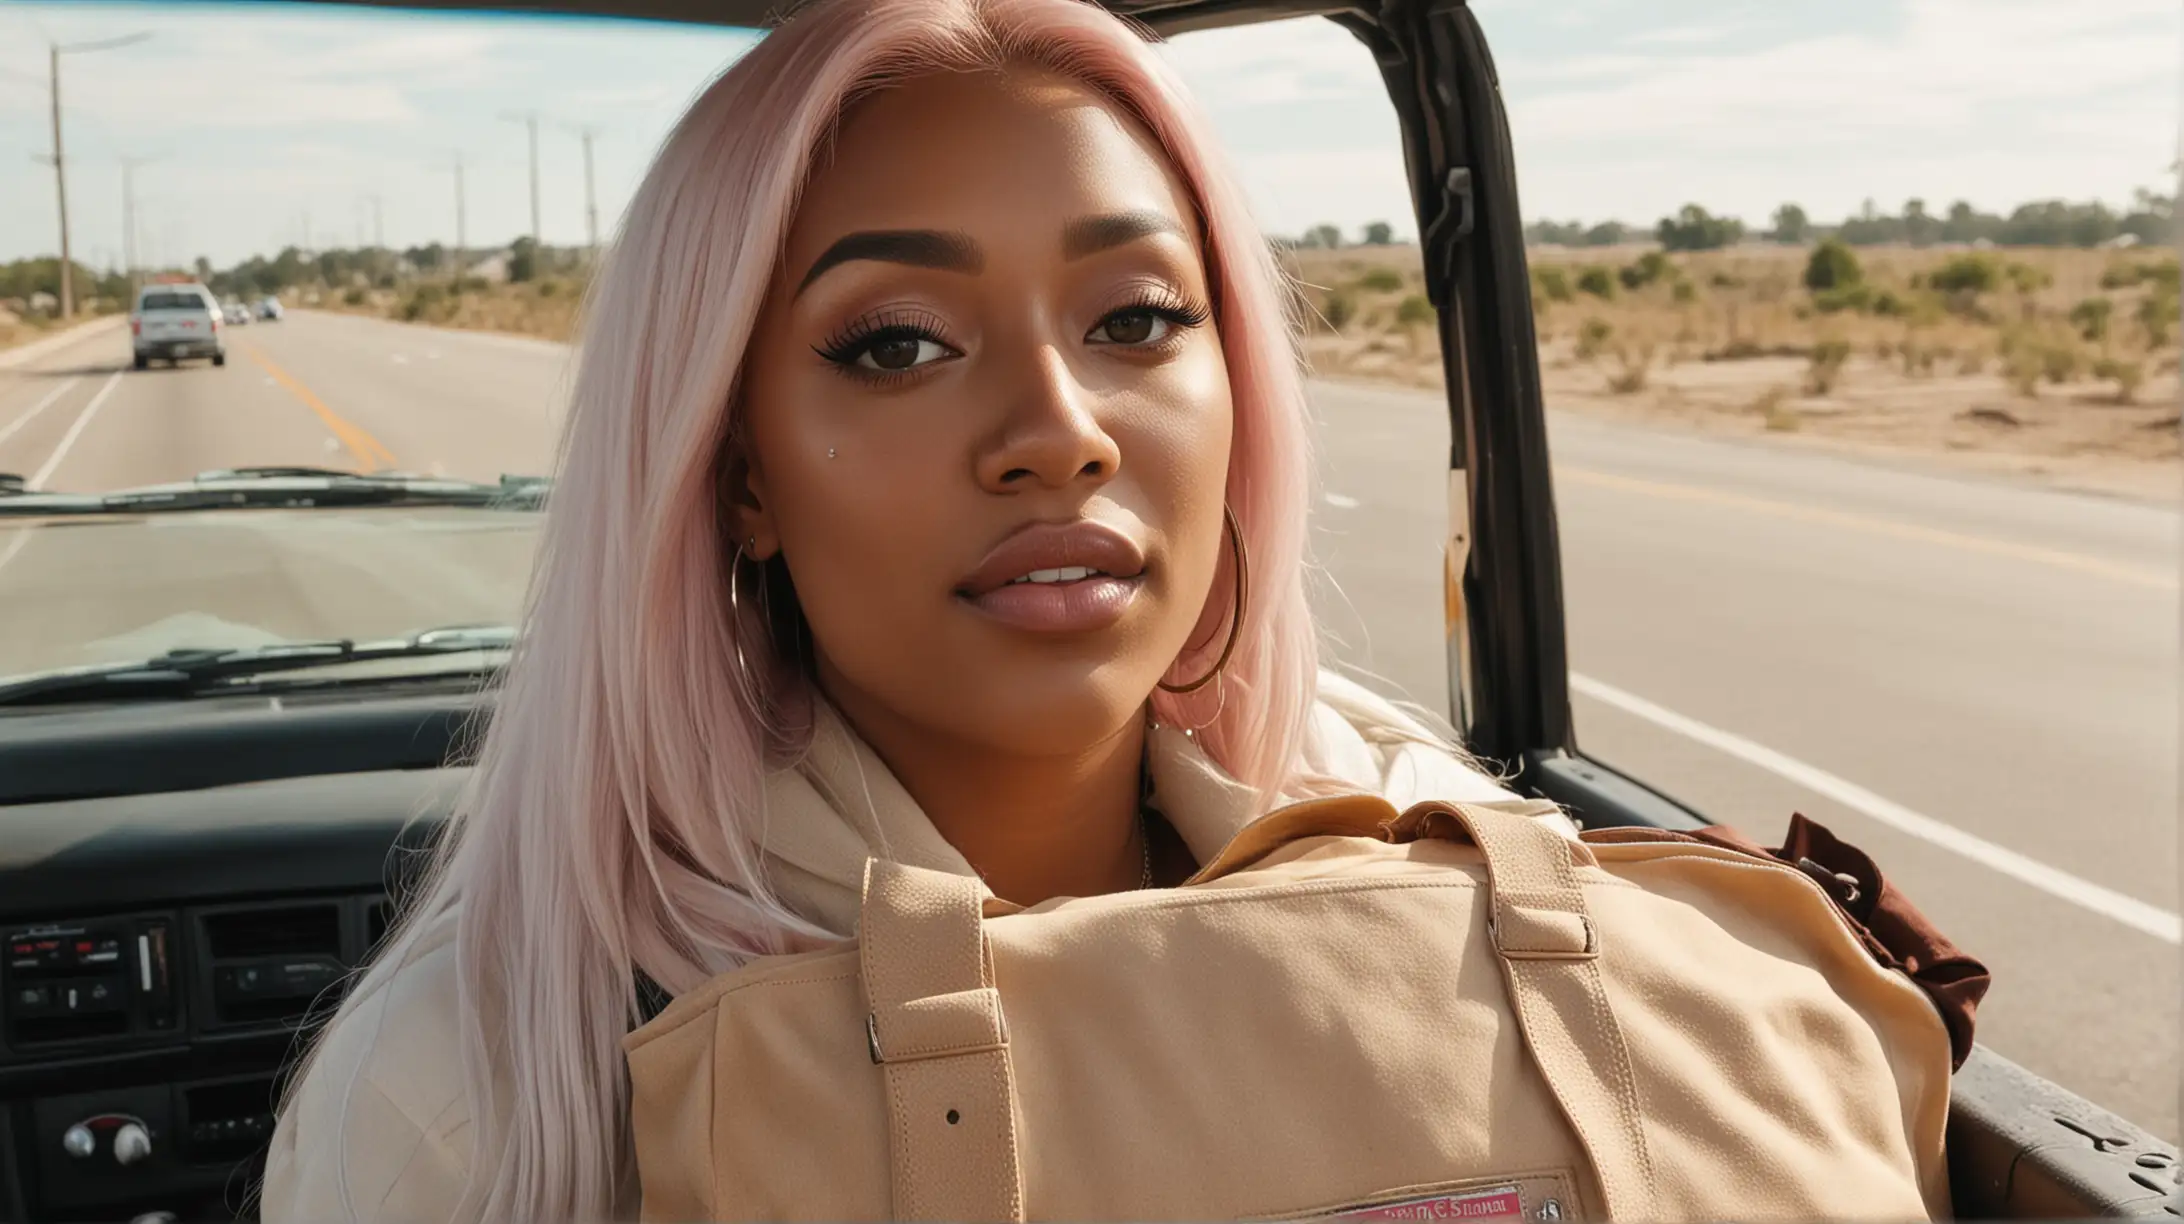 A  close up of a teary eyed Meg Thee Stallion drives a pickup truck down a Southern highway. There's a tan duffle bag next to her in the car.